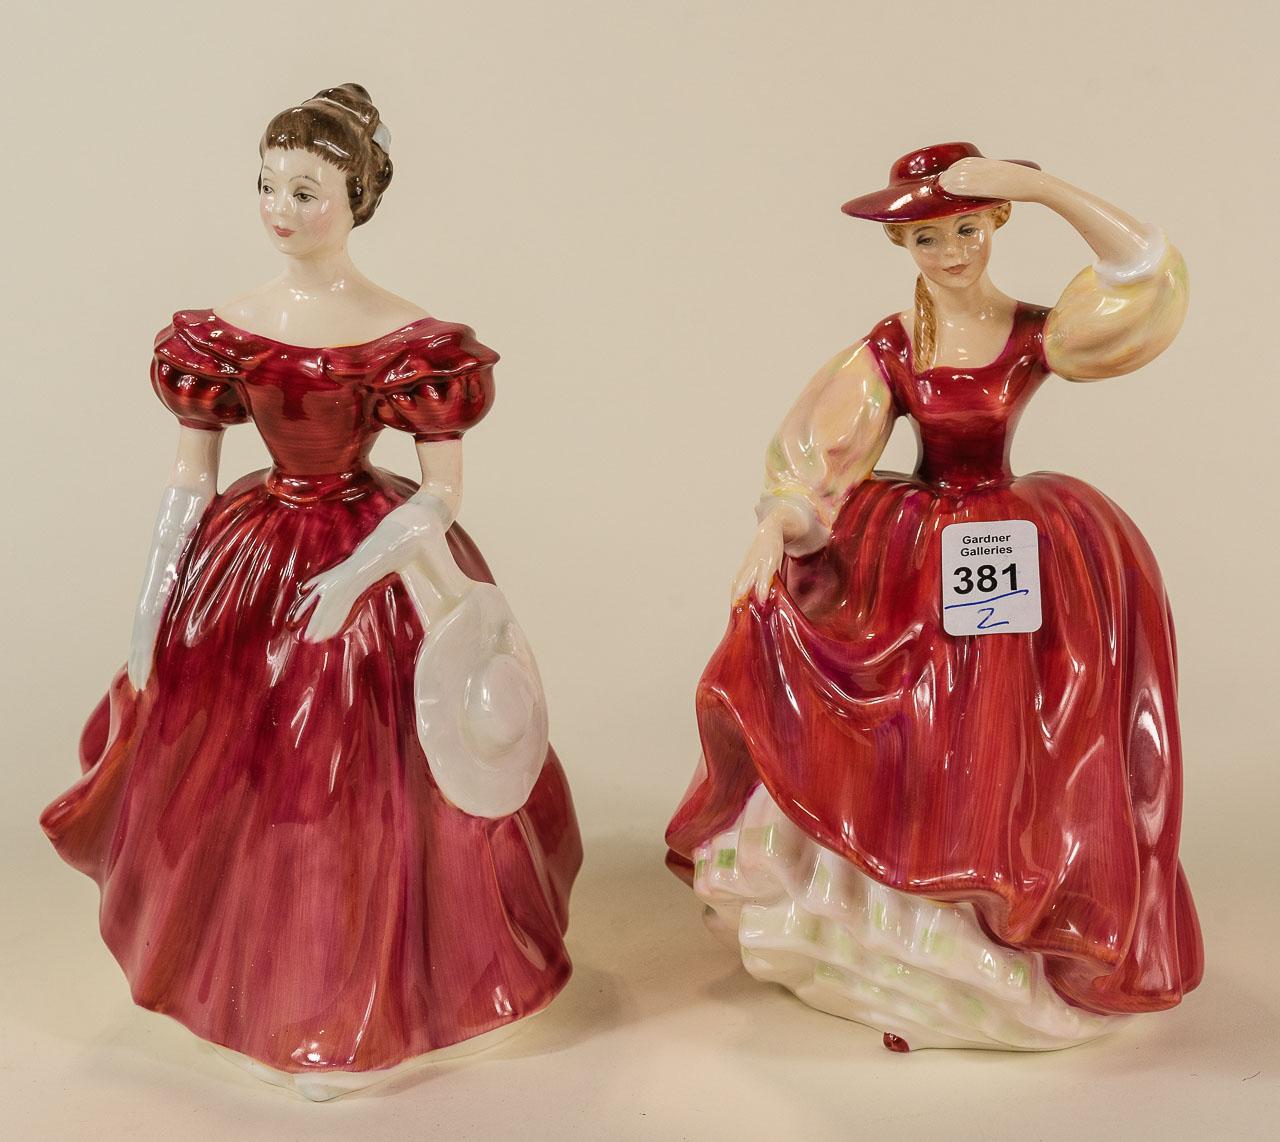 TWO ROYAL DOULTON FIGURINES | ART GLASS, FIGURINES, JEWELLERY & MORE ...